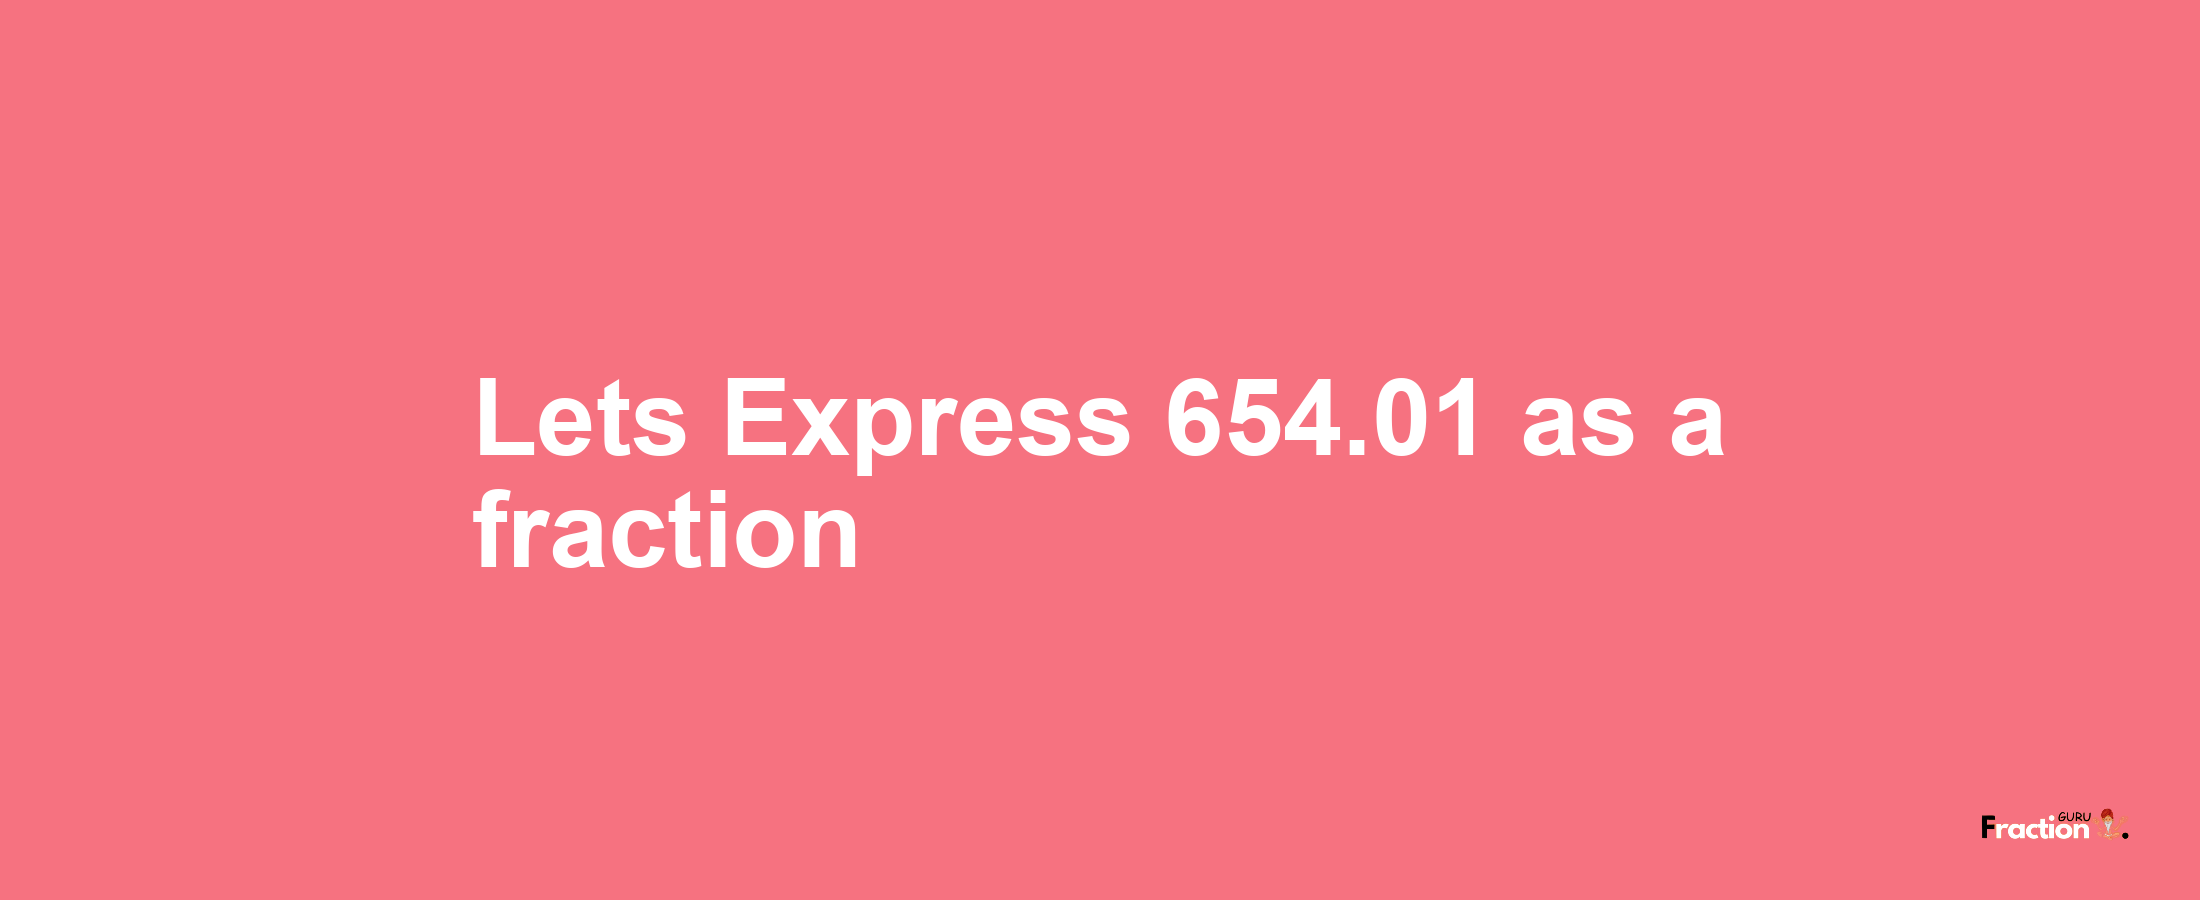 Lets Express 654.01 as afraction